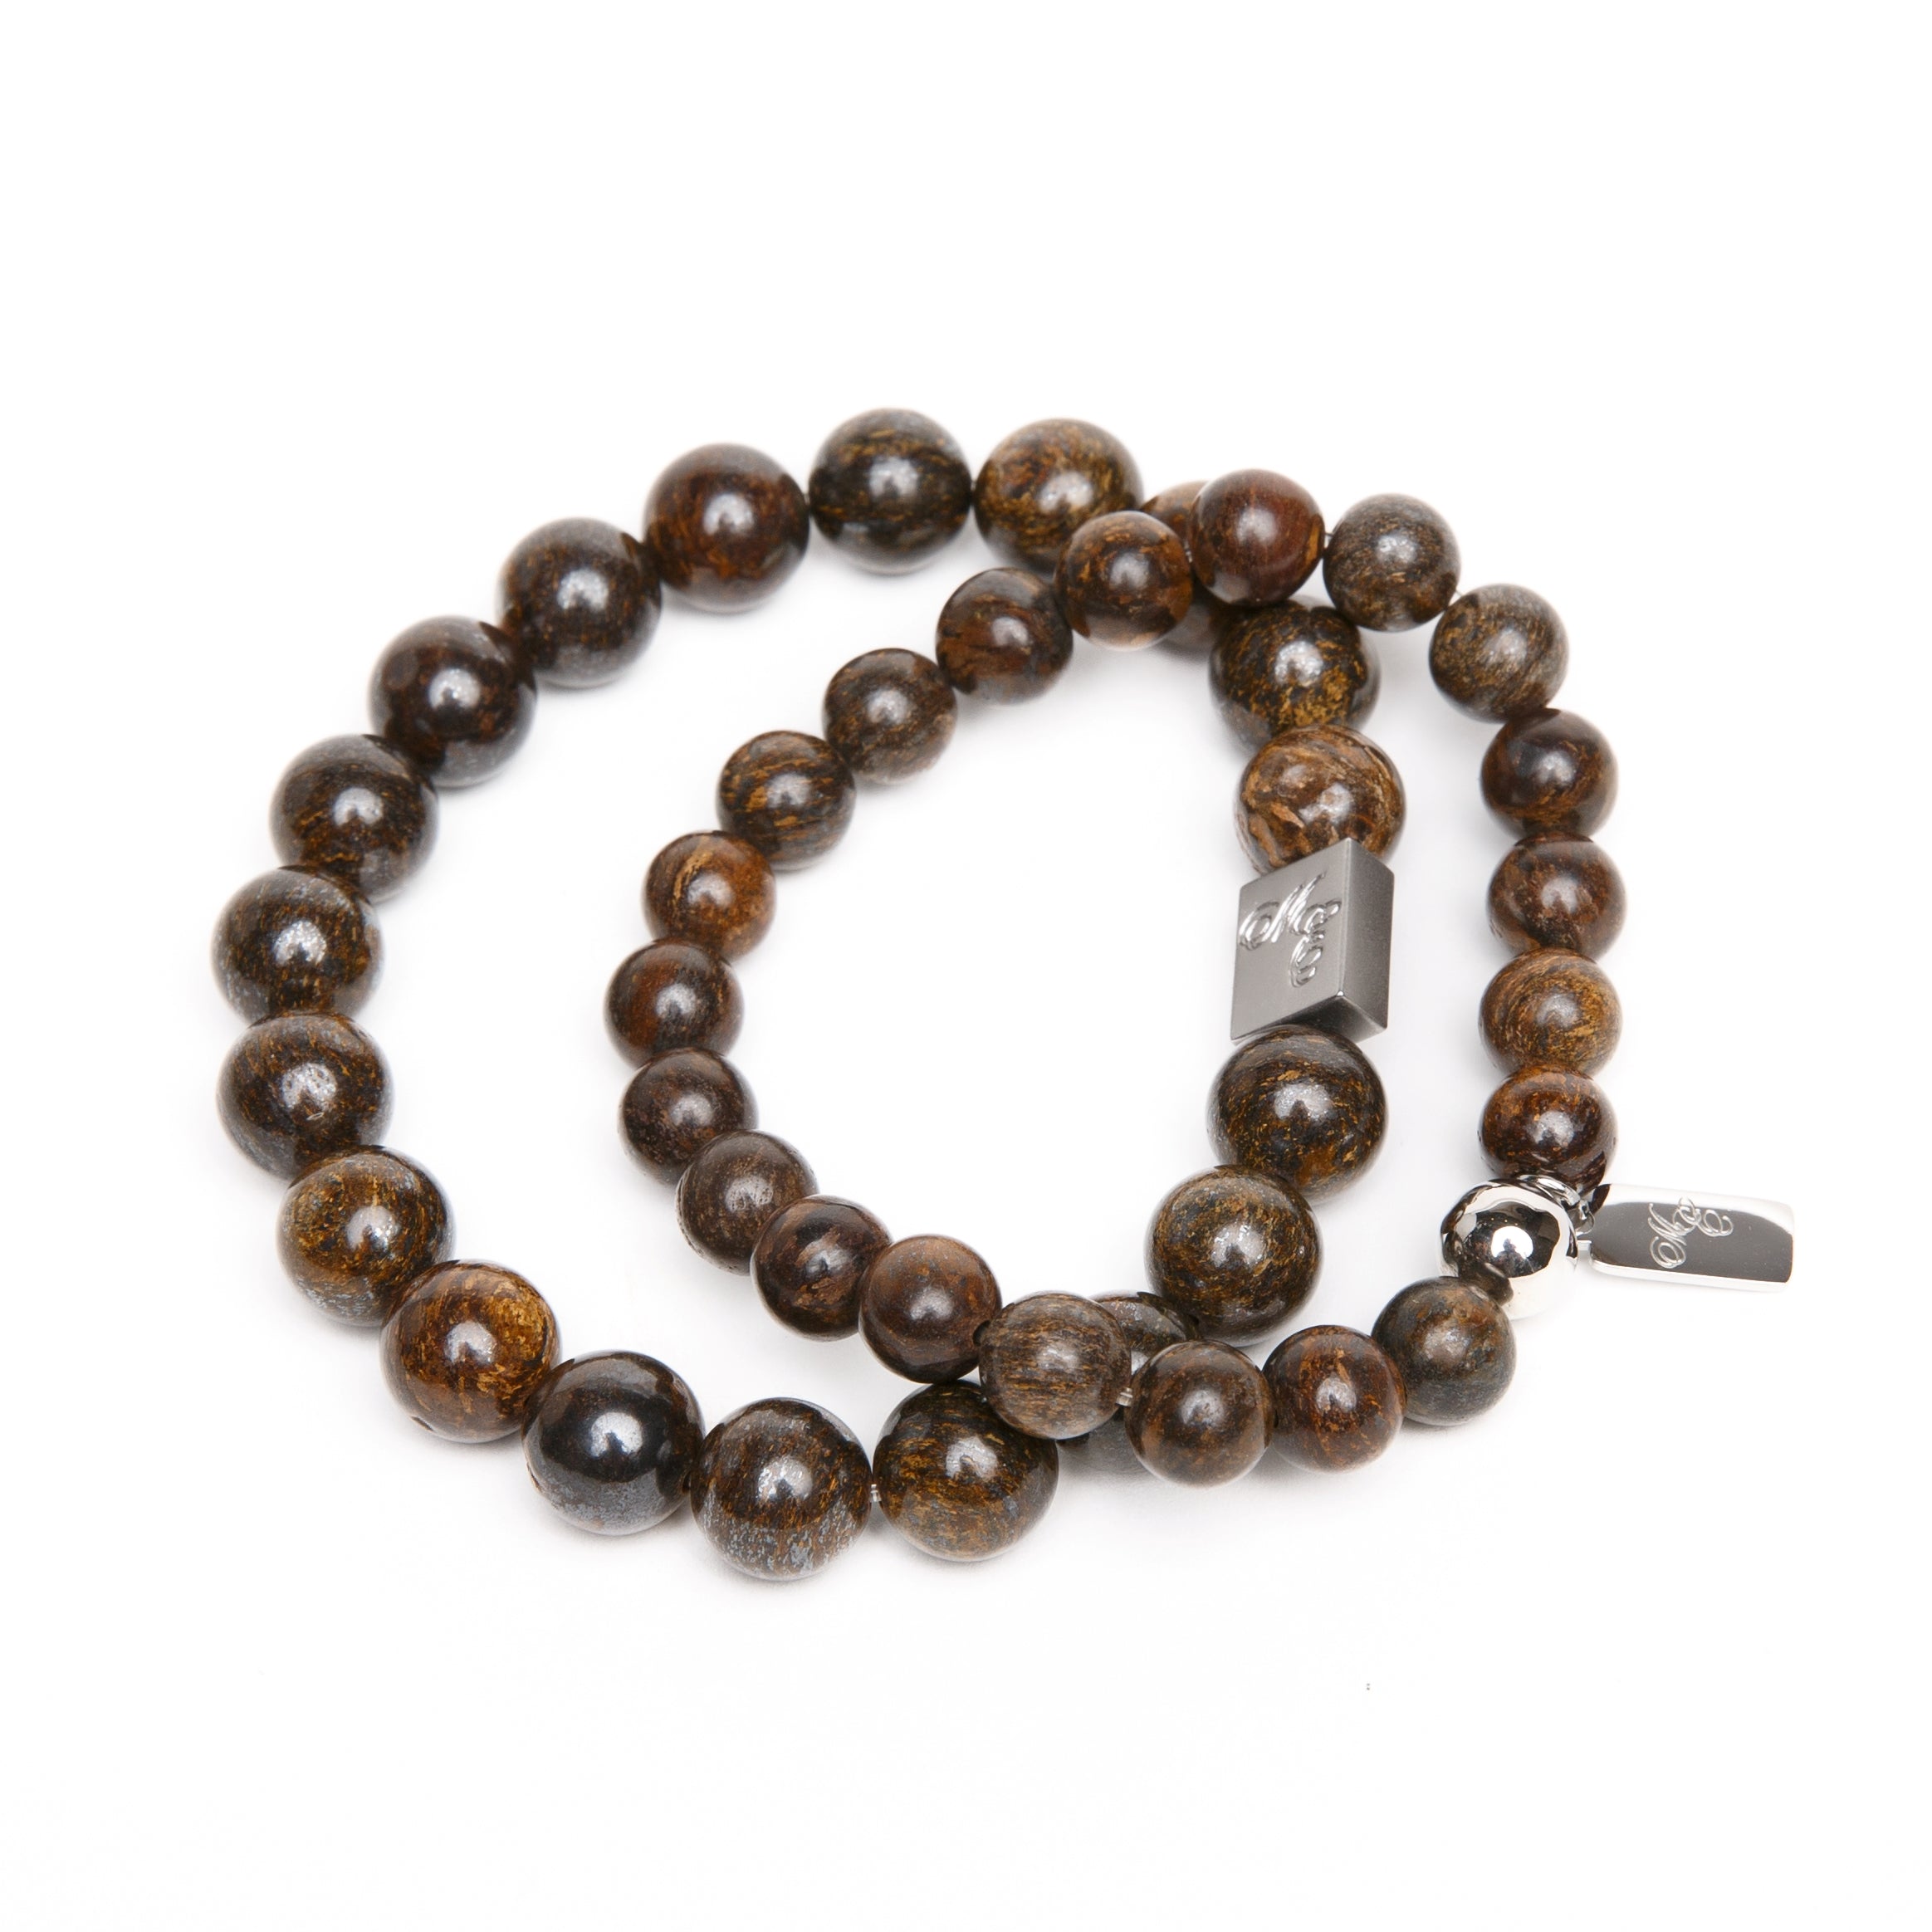 ME™ His & Hers South African Bronzite 2-pc Bracelet Set Unisex Bracelets Show Your Africa 